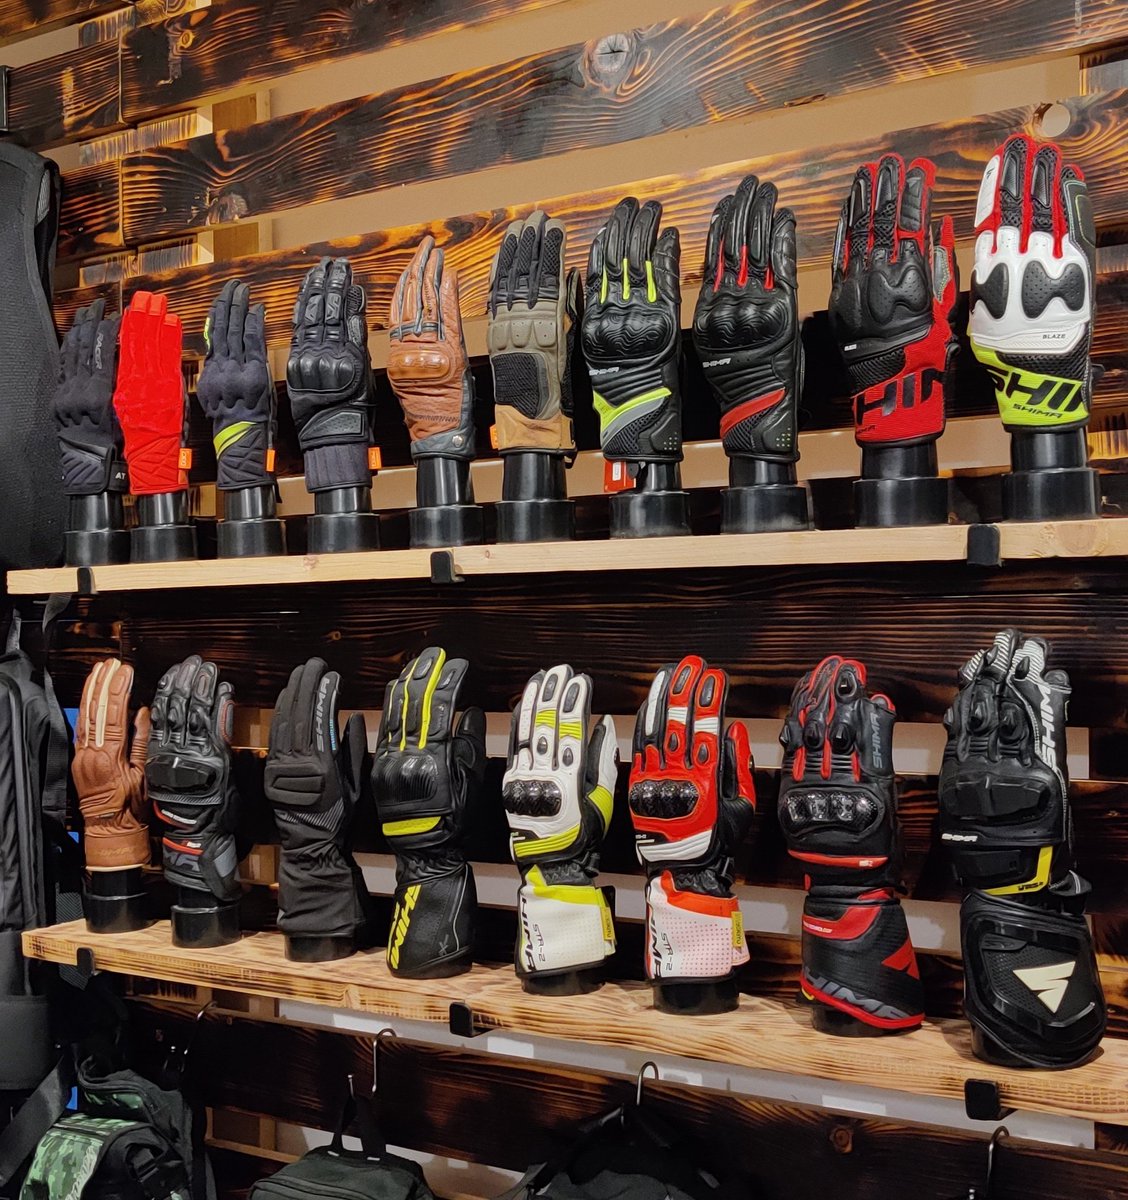 We have got the widest variety of gloves, lots of colour & size options. A glove for every purpose, a glove for every hand. Shop today on gthouse.shop or drop in to our store maps.app.goo.gl/NnHBzWTjBrj48T… #gthouse #ridinggloves